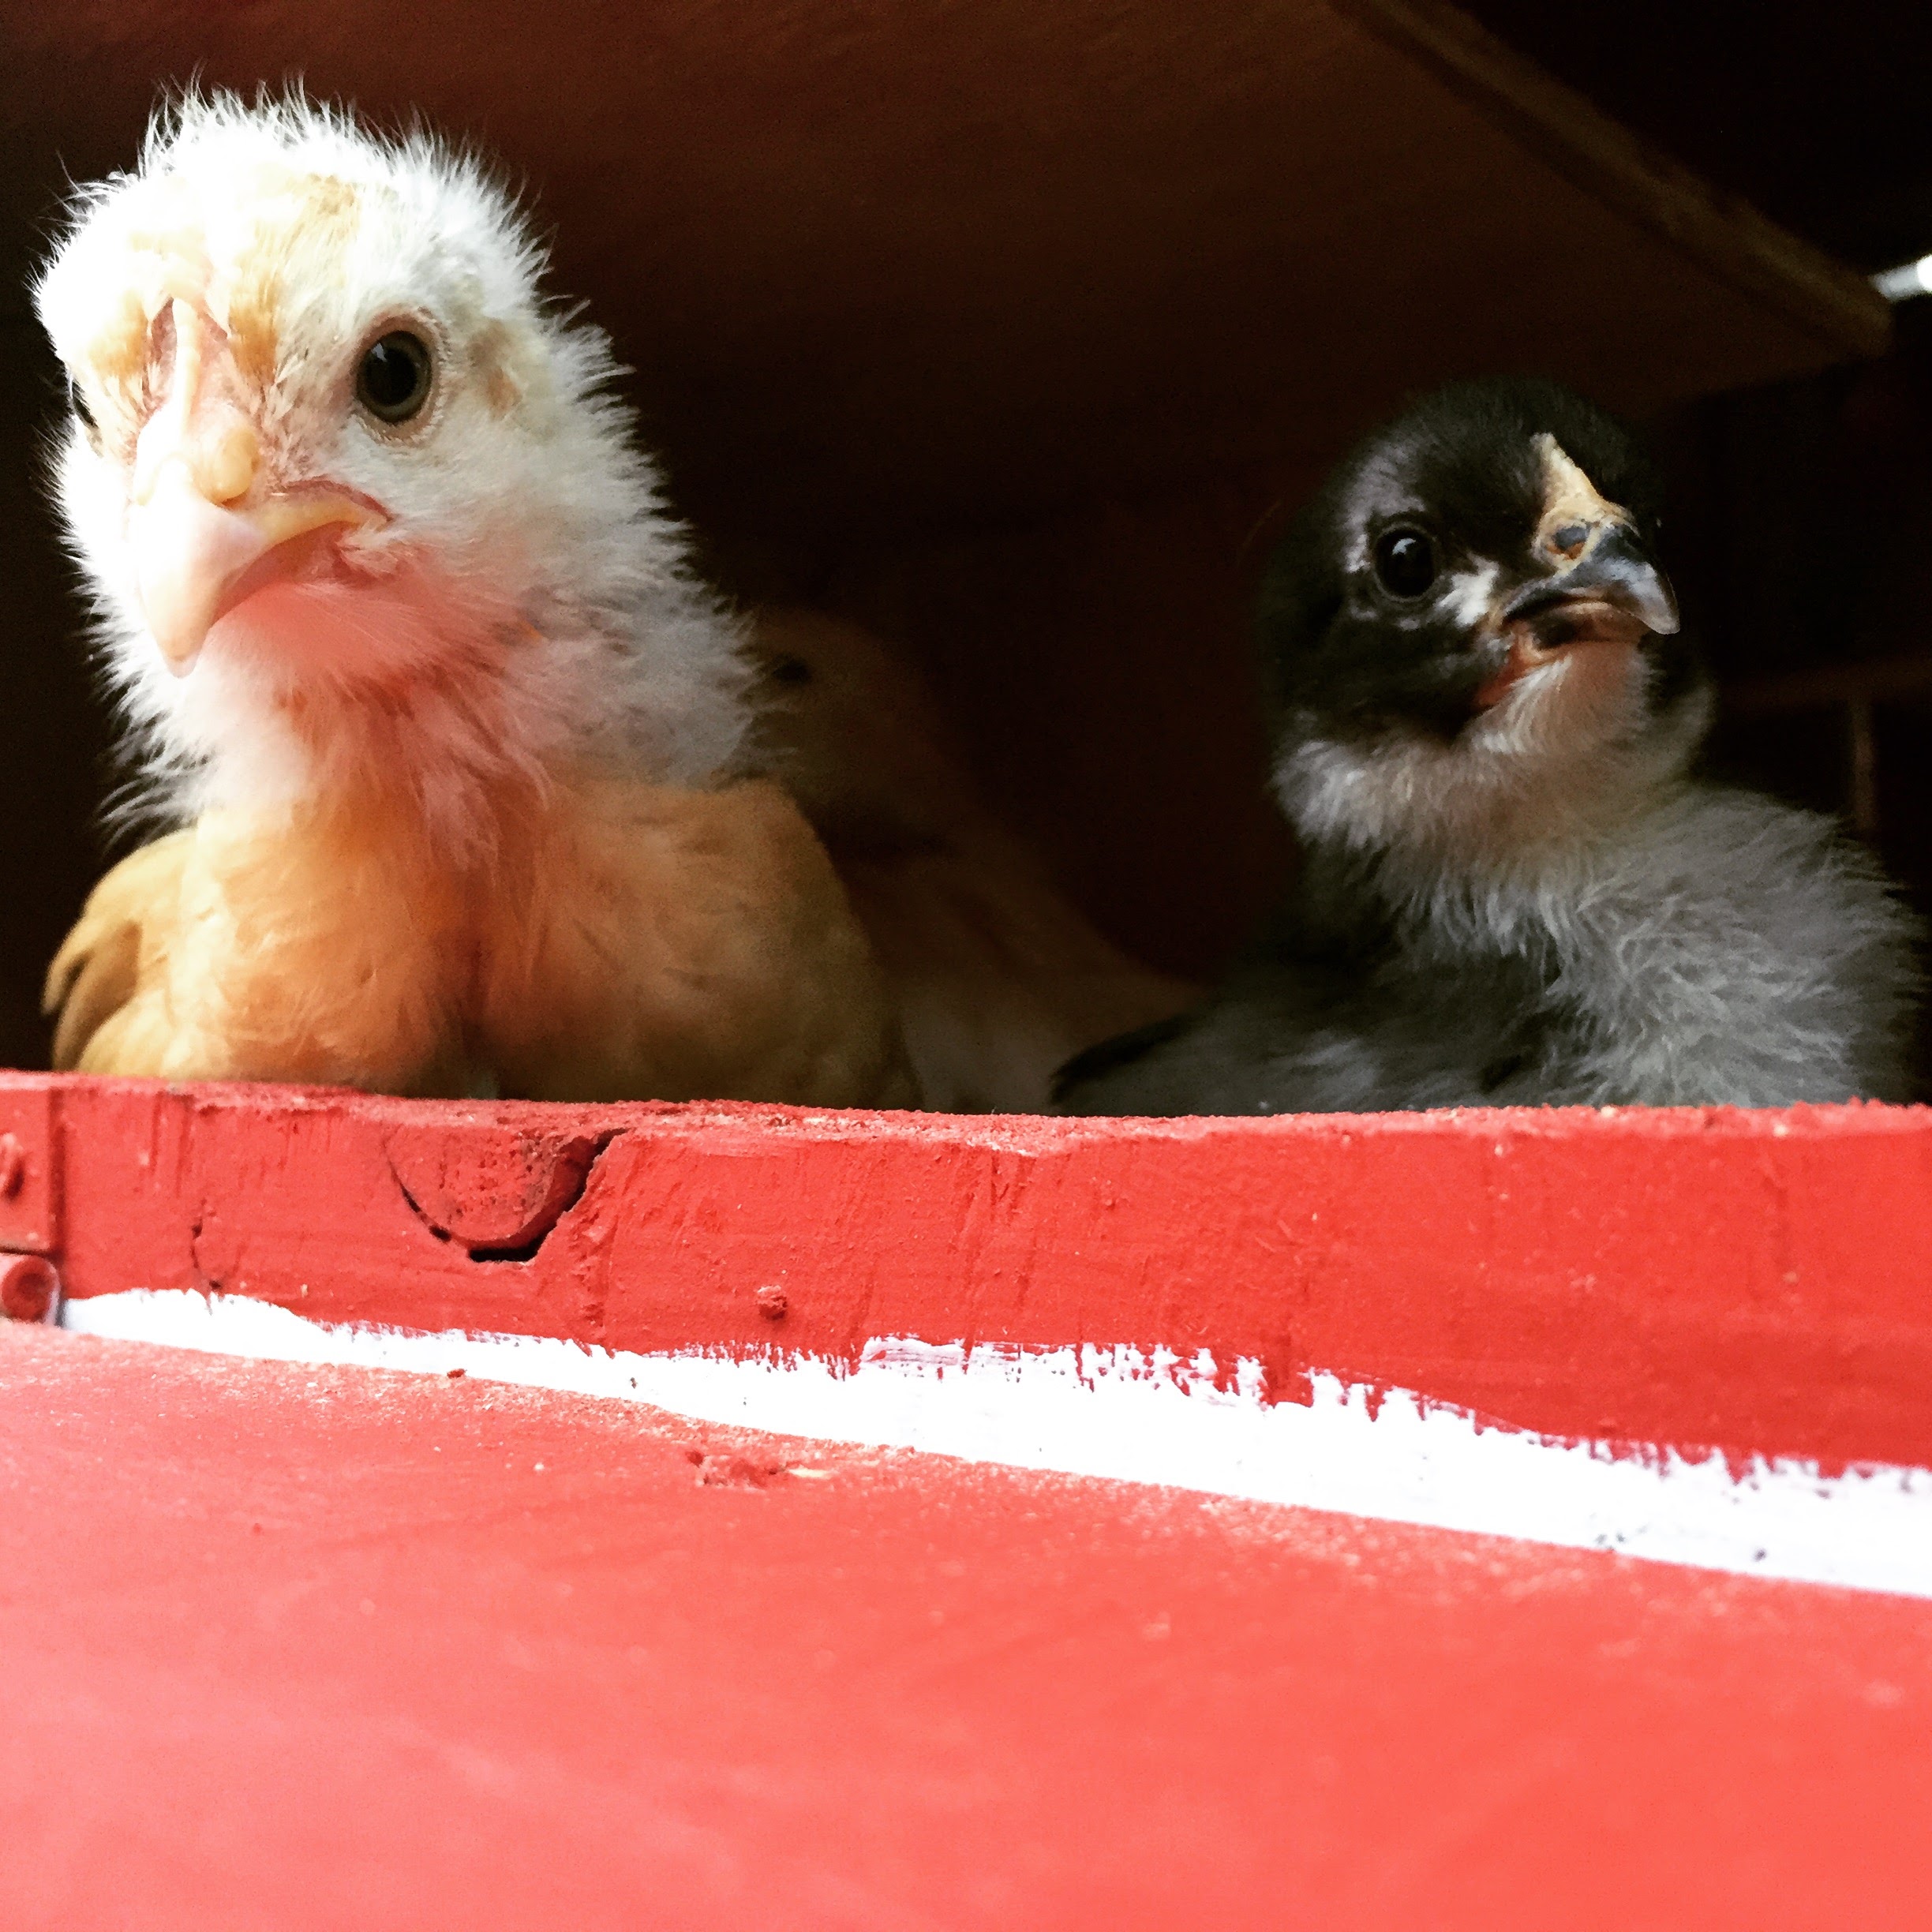 A pair of chicks